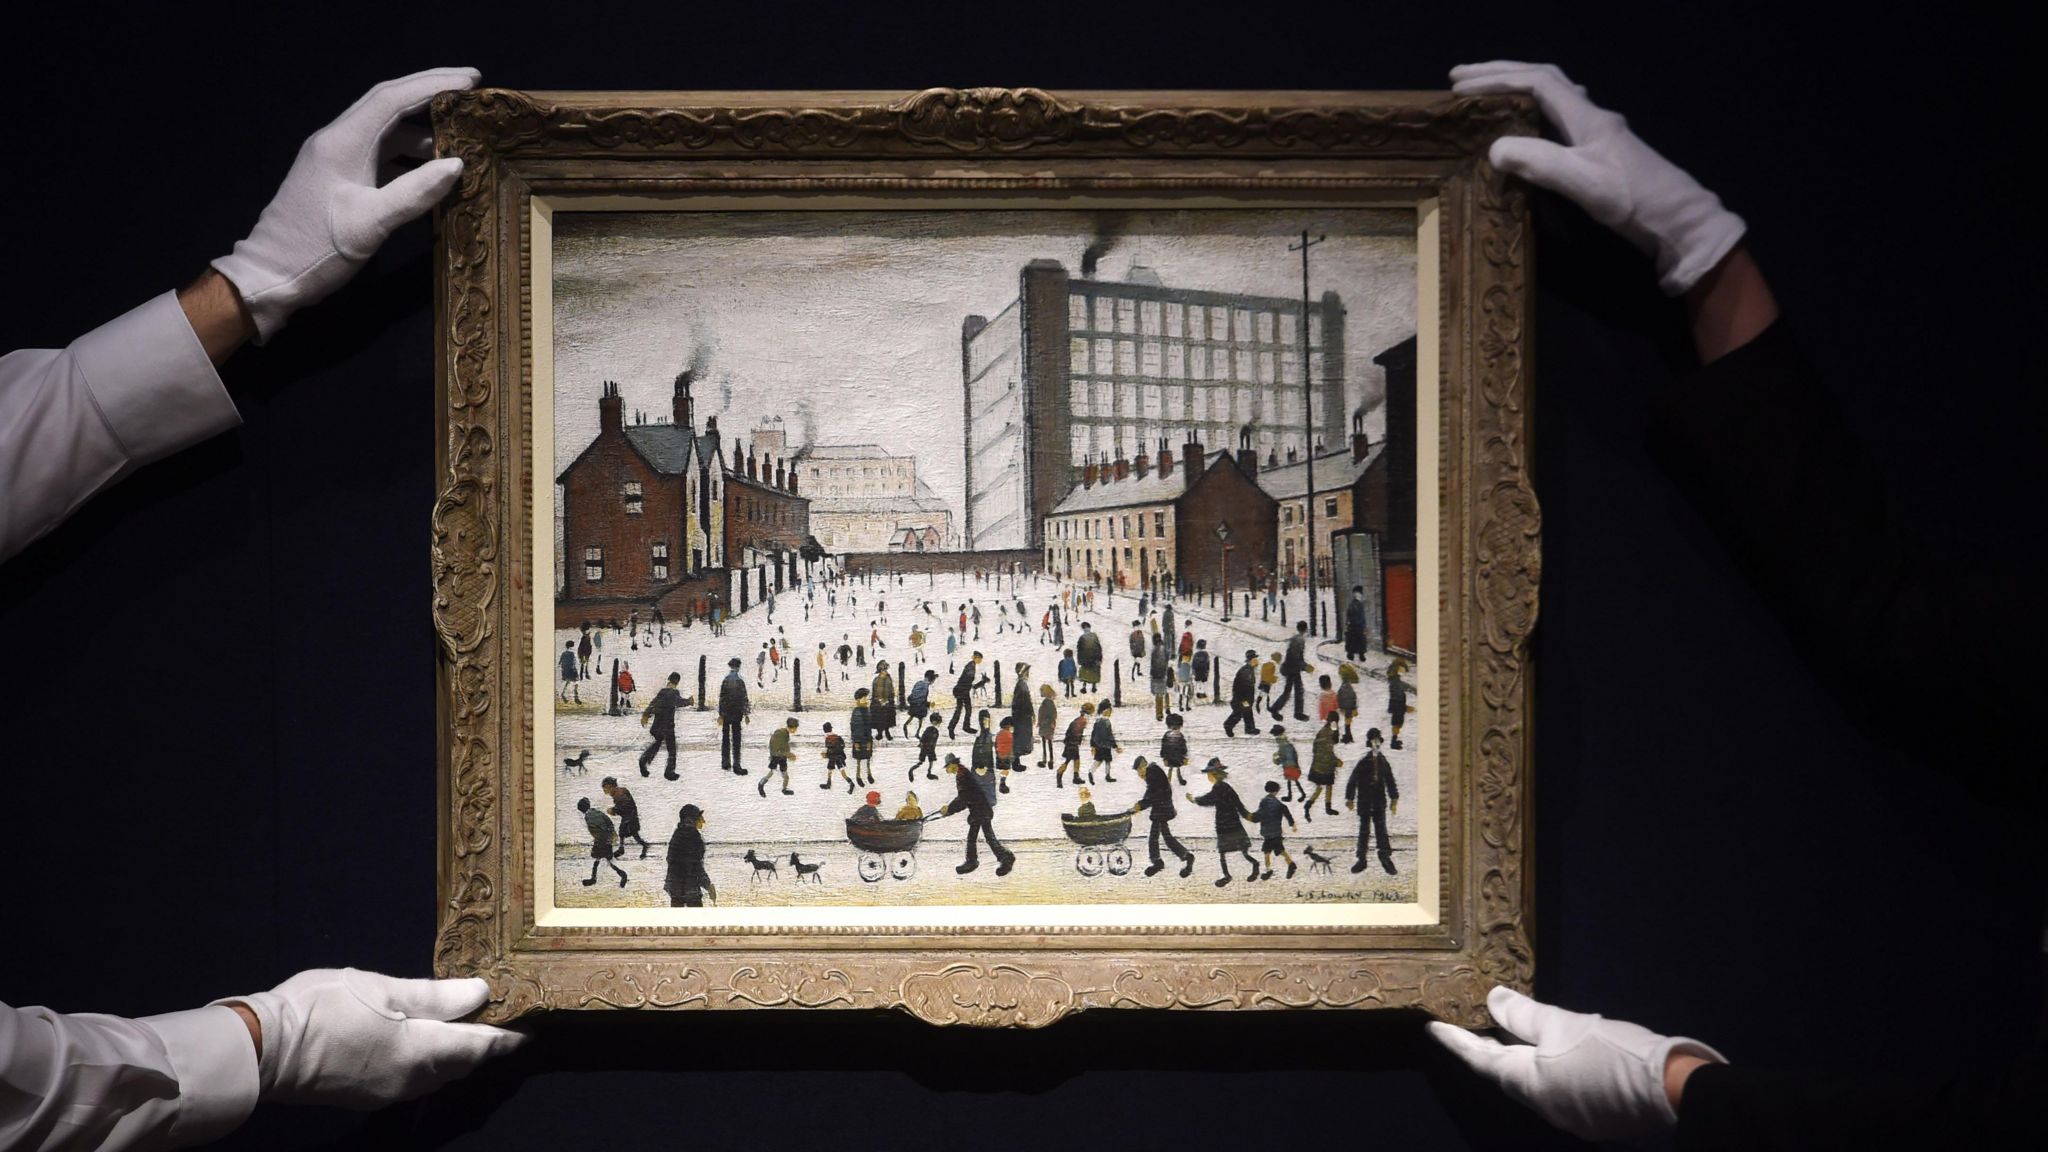 Two people in white gloves hold LS Lowry's artwork, The Mill, Pendlebury, which depicts a crowd of people in front of terraced houses and a mill